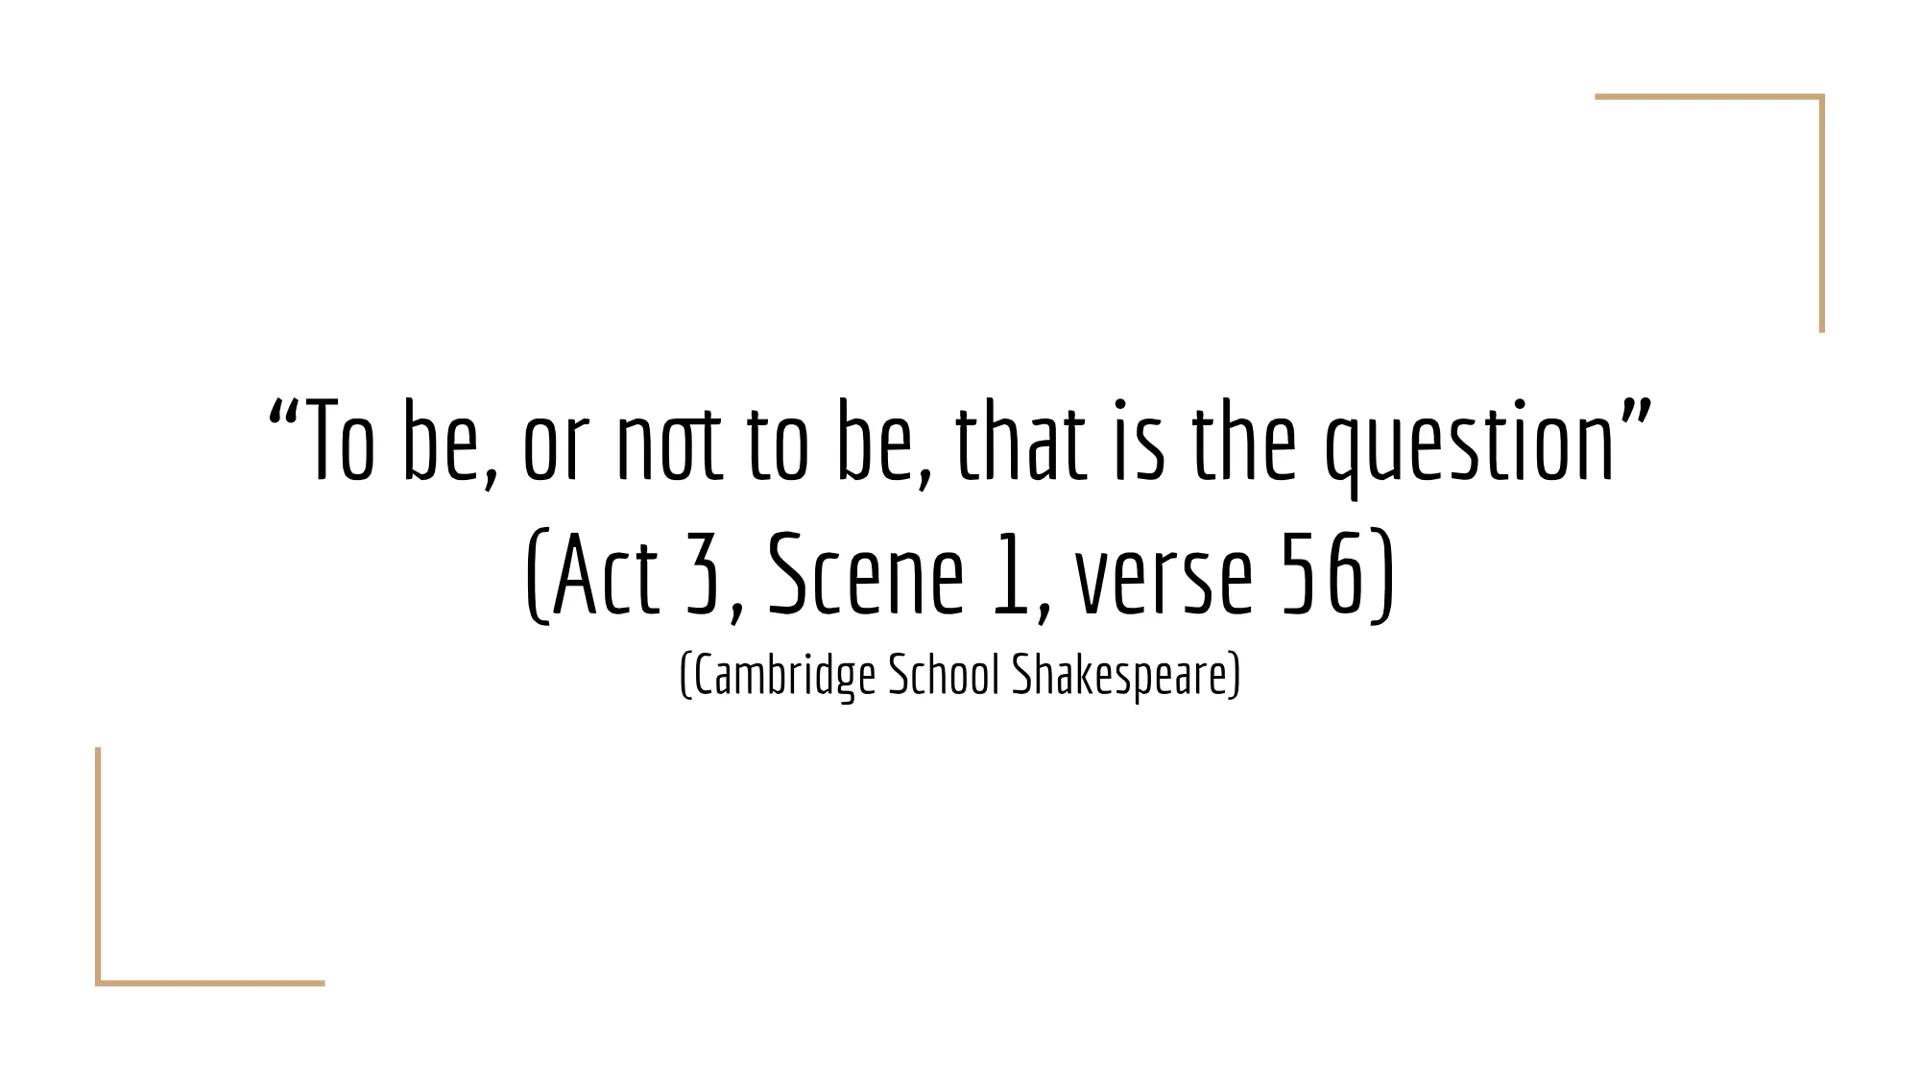 SHOR
AW
CALUMNIA
JACE
HAMLET
WILLIAM
SHAKESPEARE
BIBLIA
FE
ven
SOGEZIEN LY "To be, or not to be, that is the question"
(Act 3, Scene 1, vers